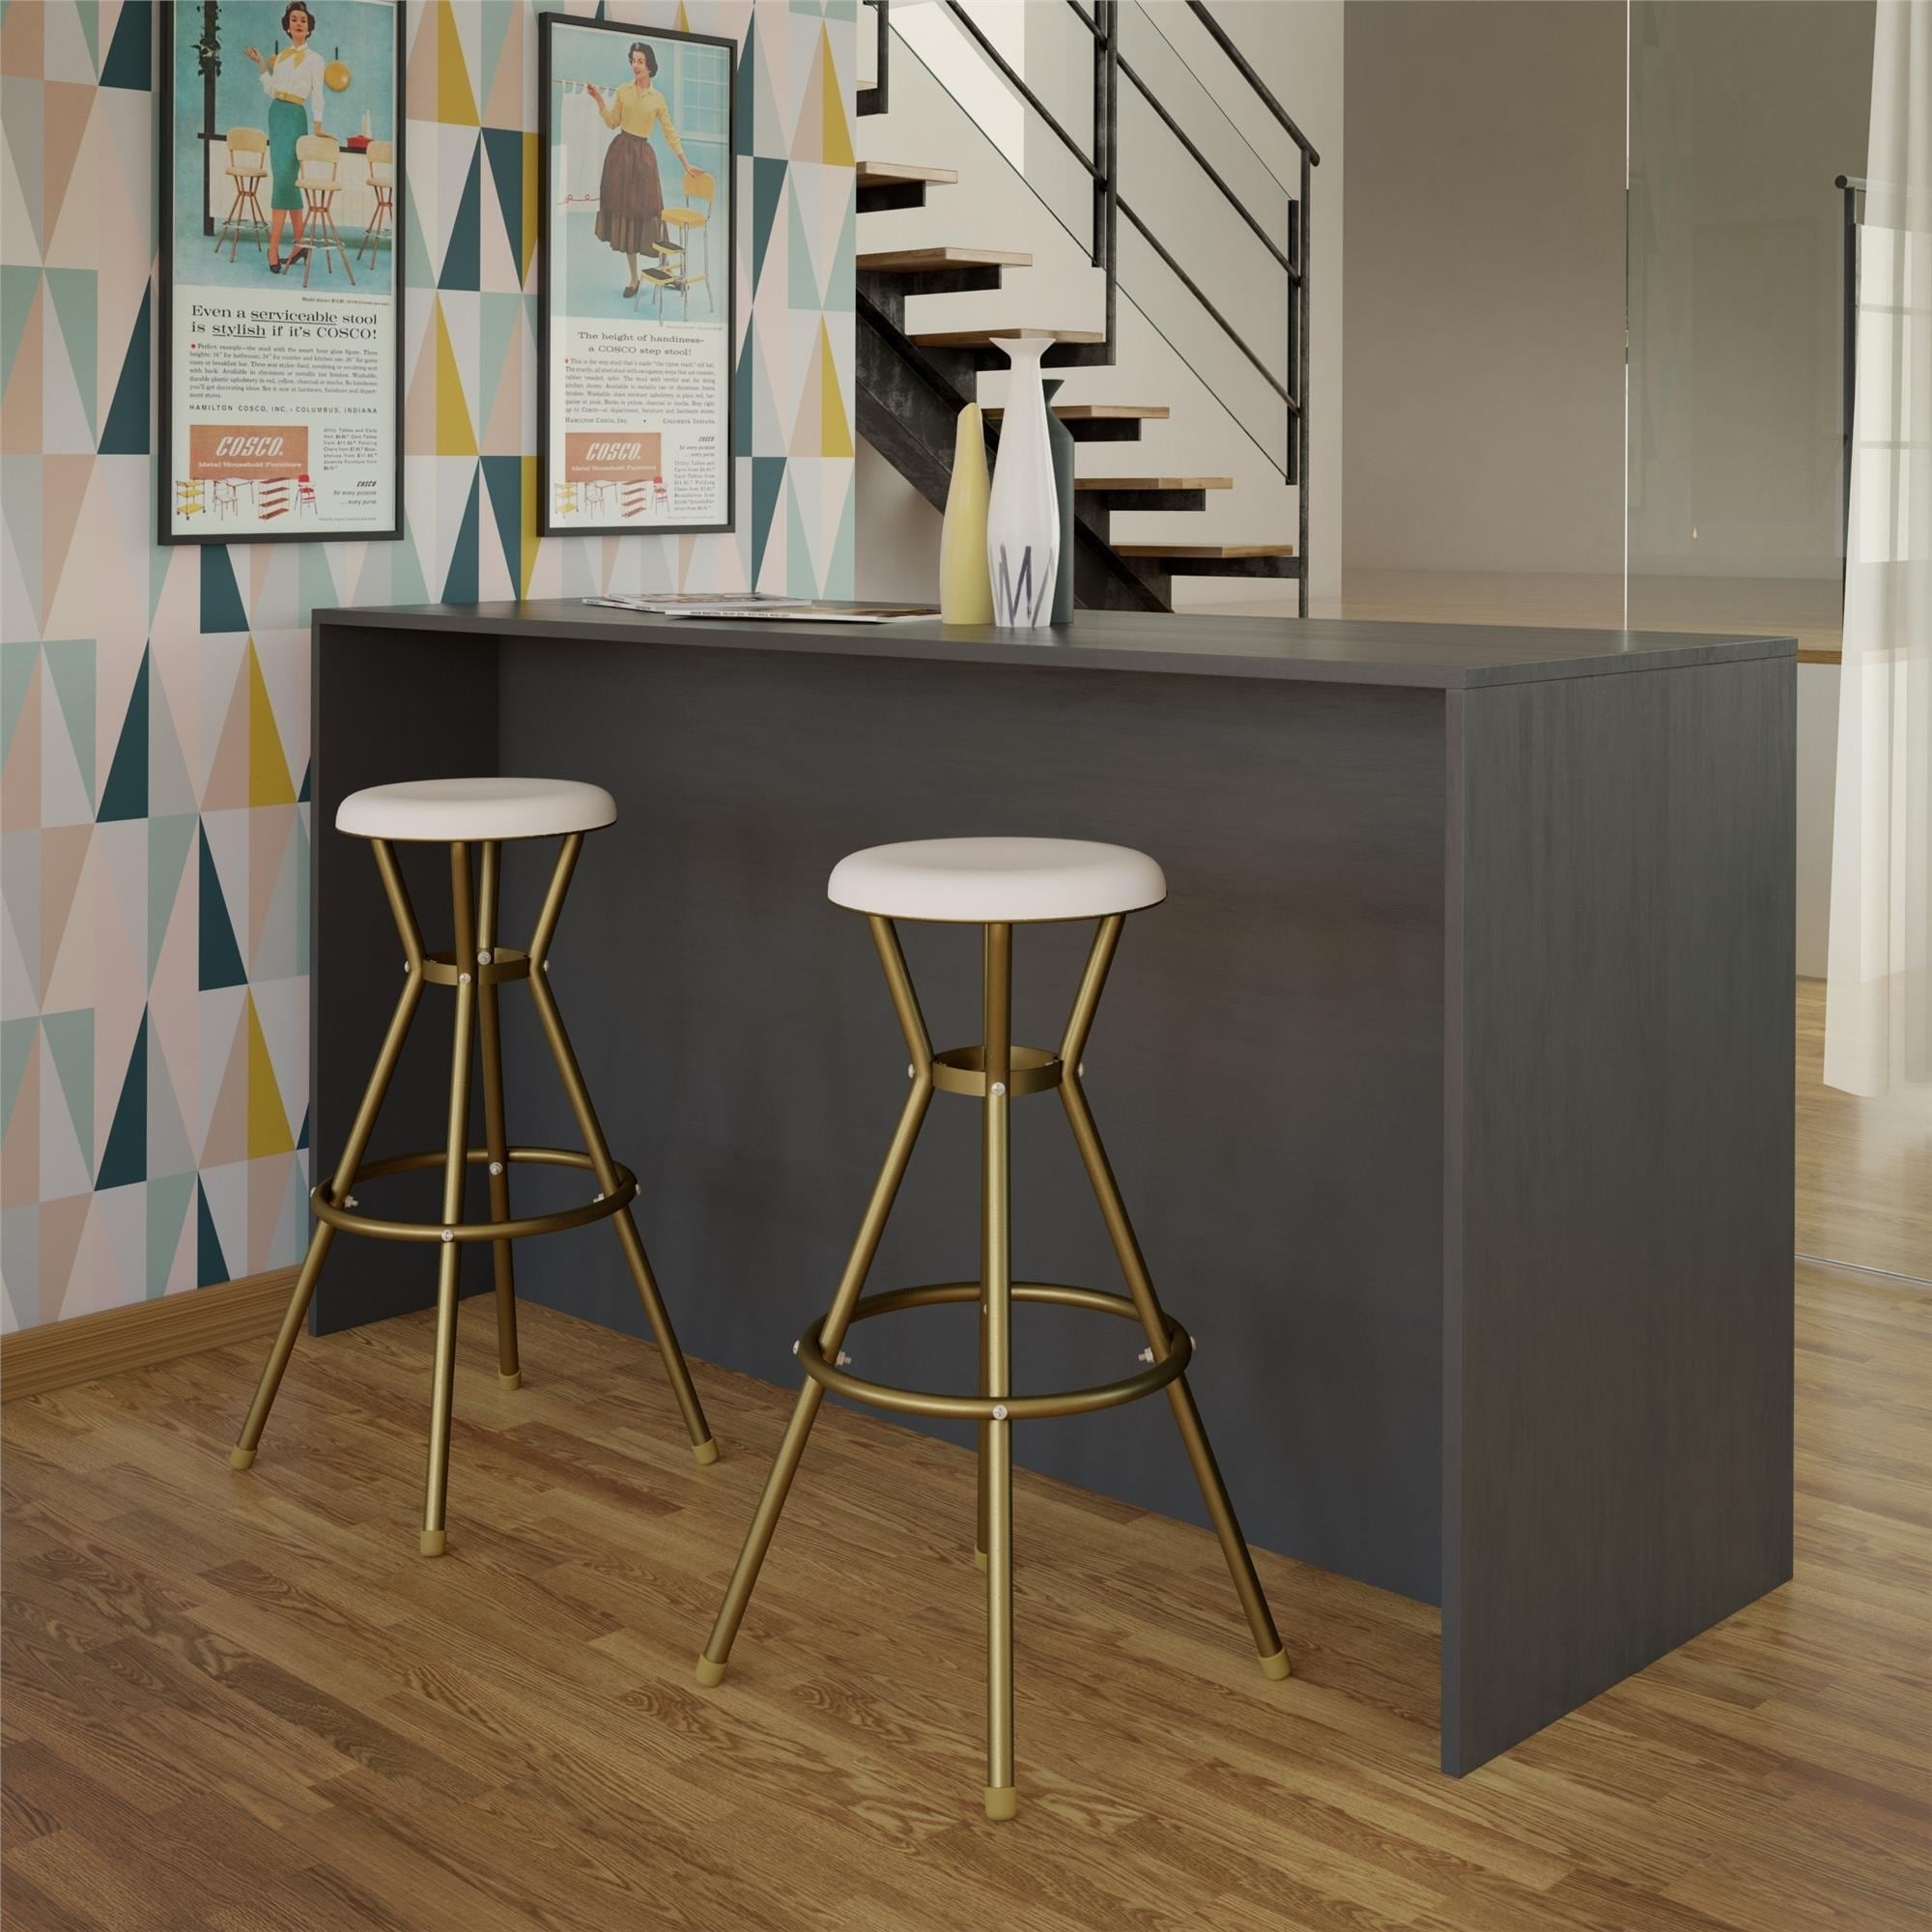 Shop The Curated Nomad Gramercy Retro Metal Backless Bar Stools